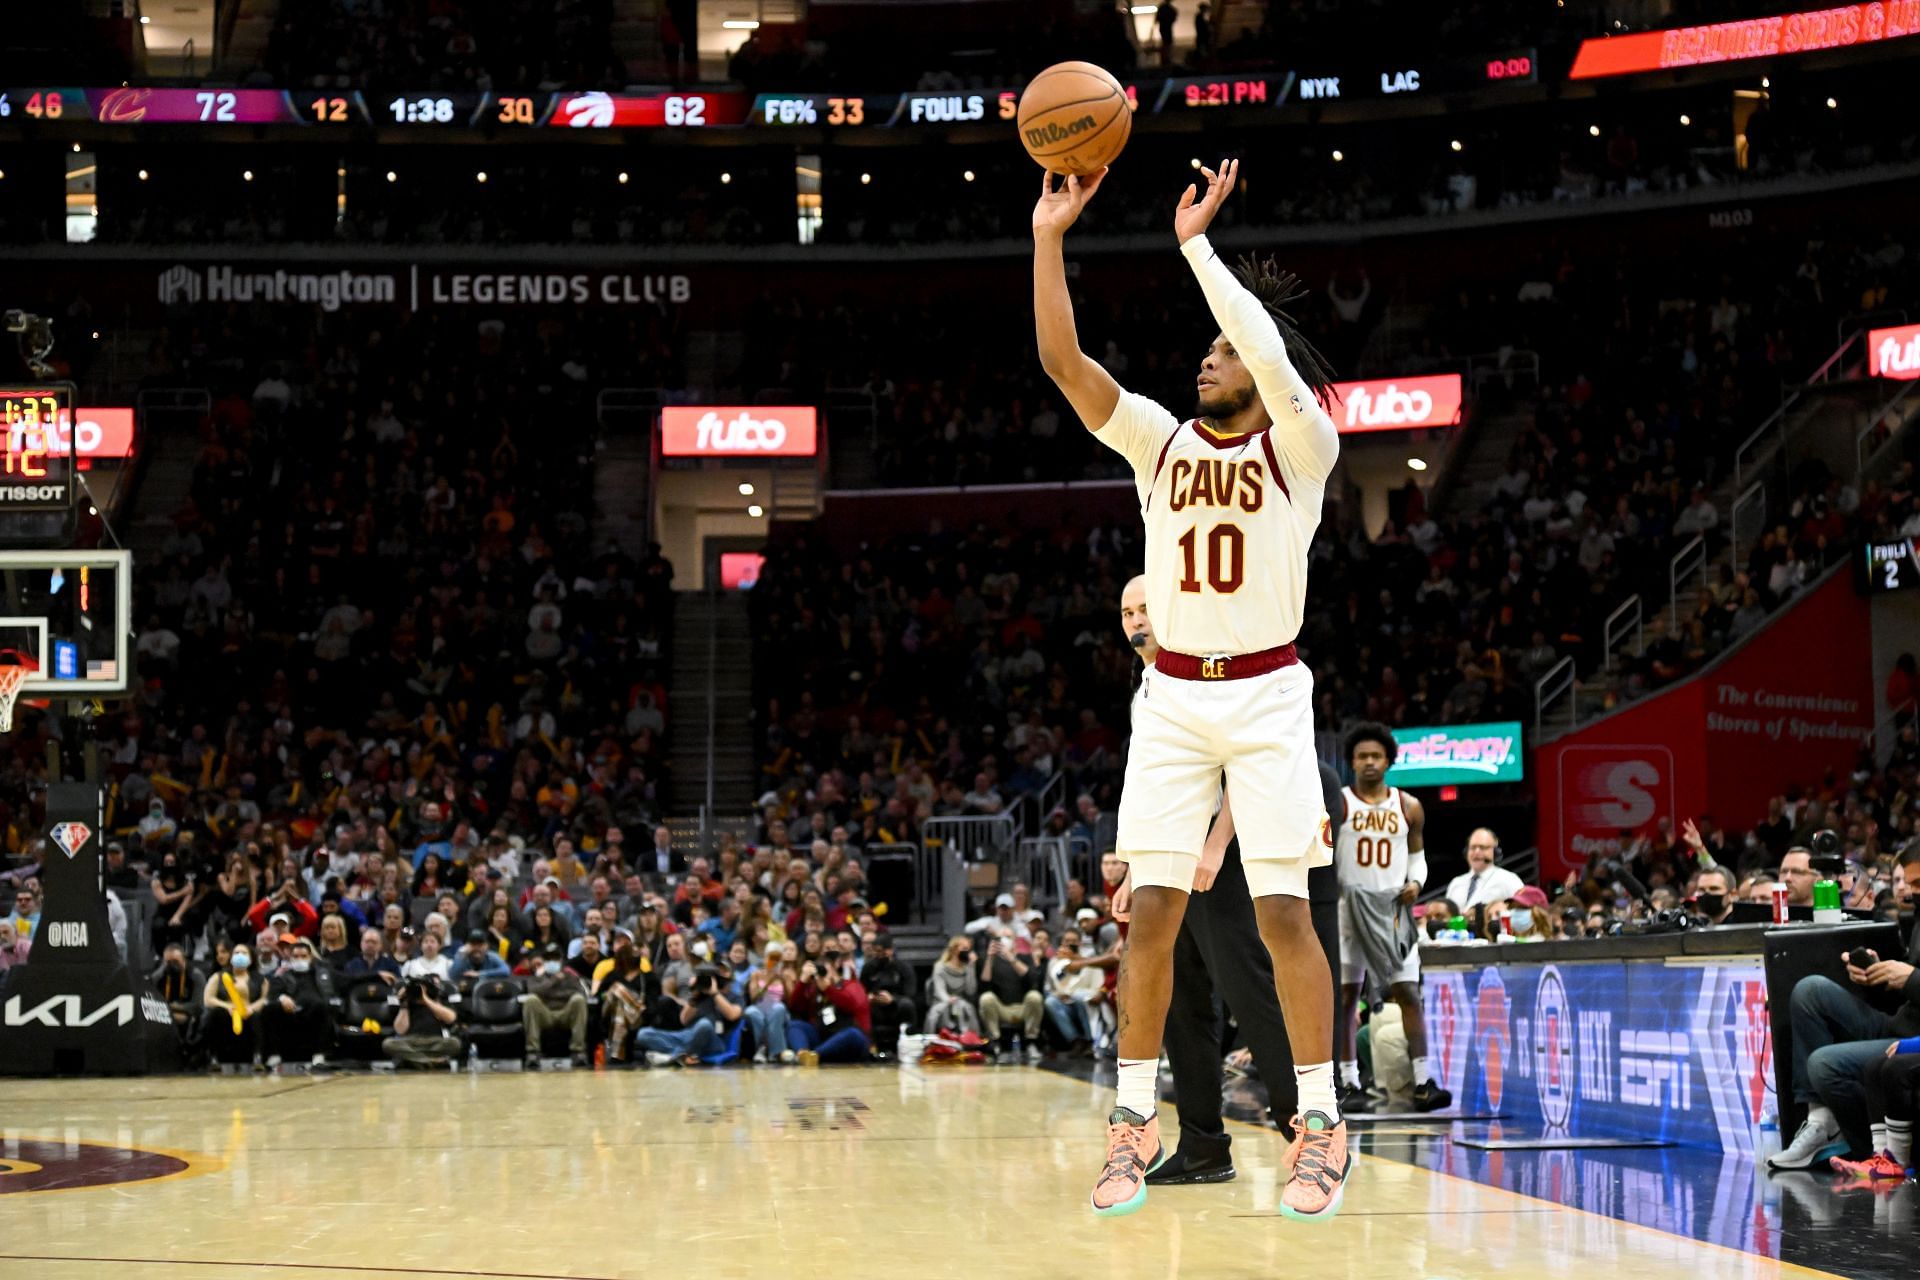 Darius Garland attempts a three-pointer for the Cavs.